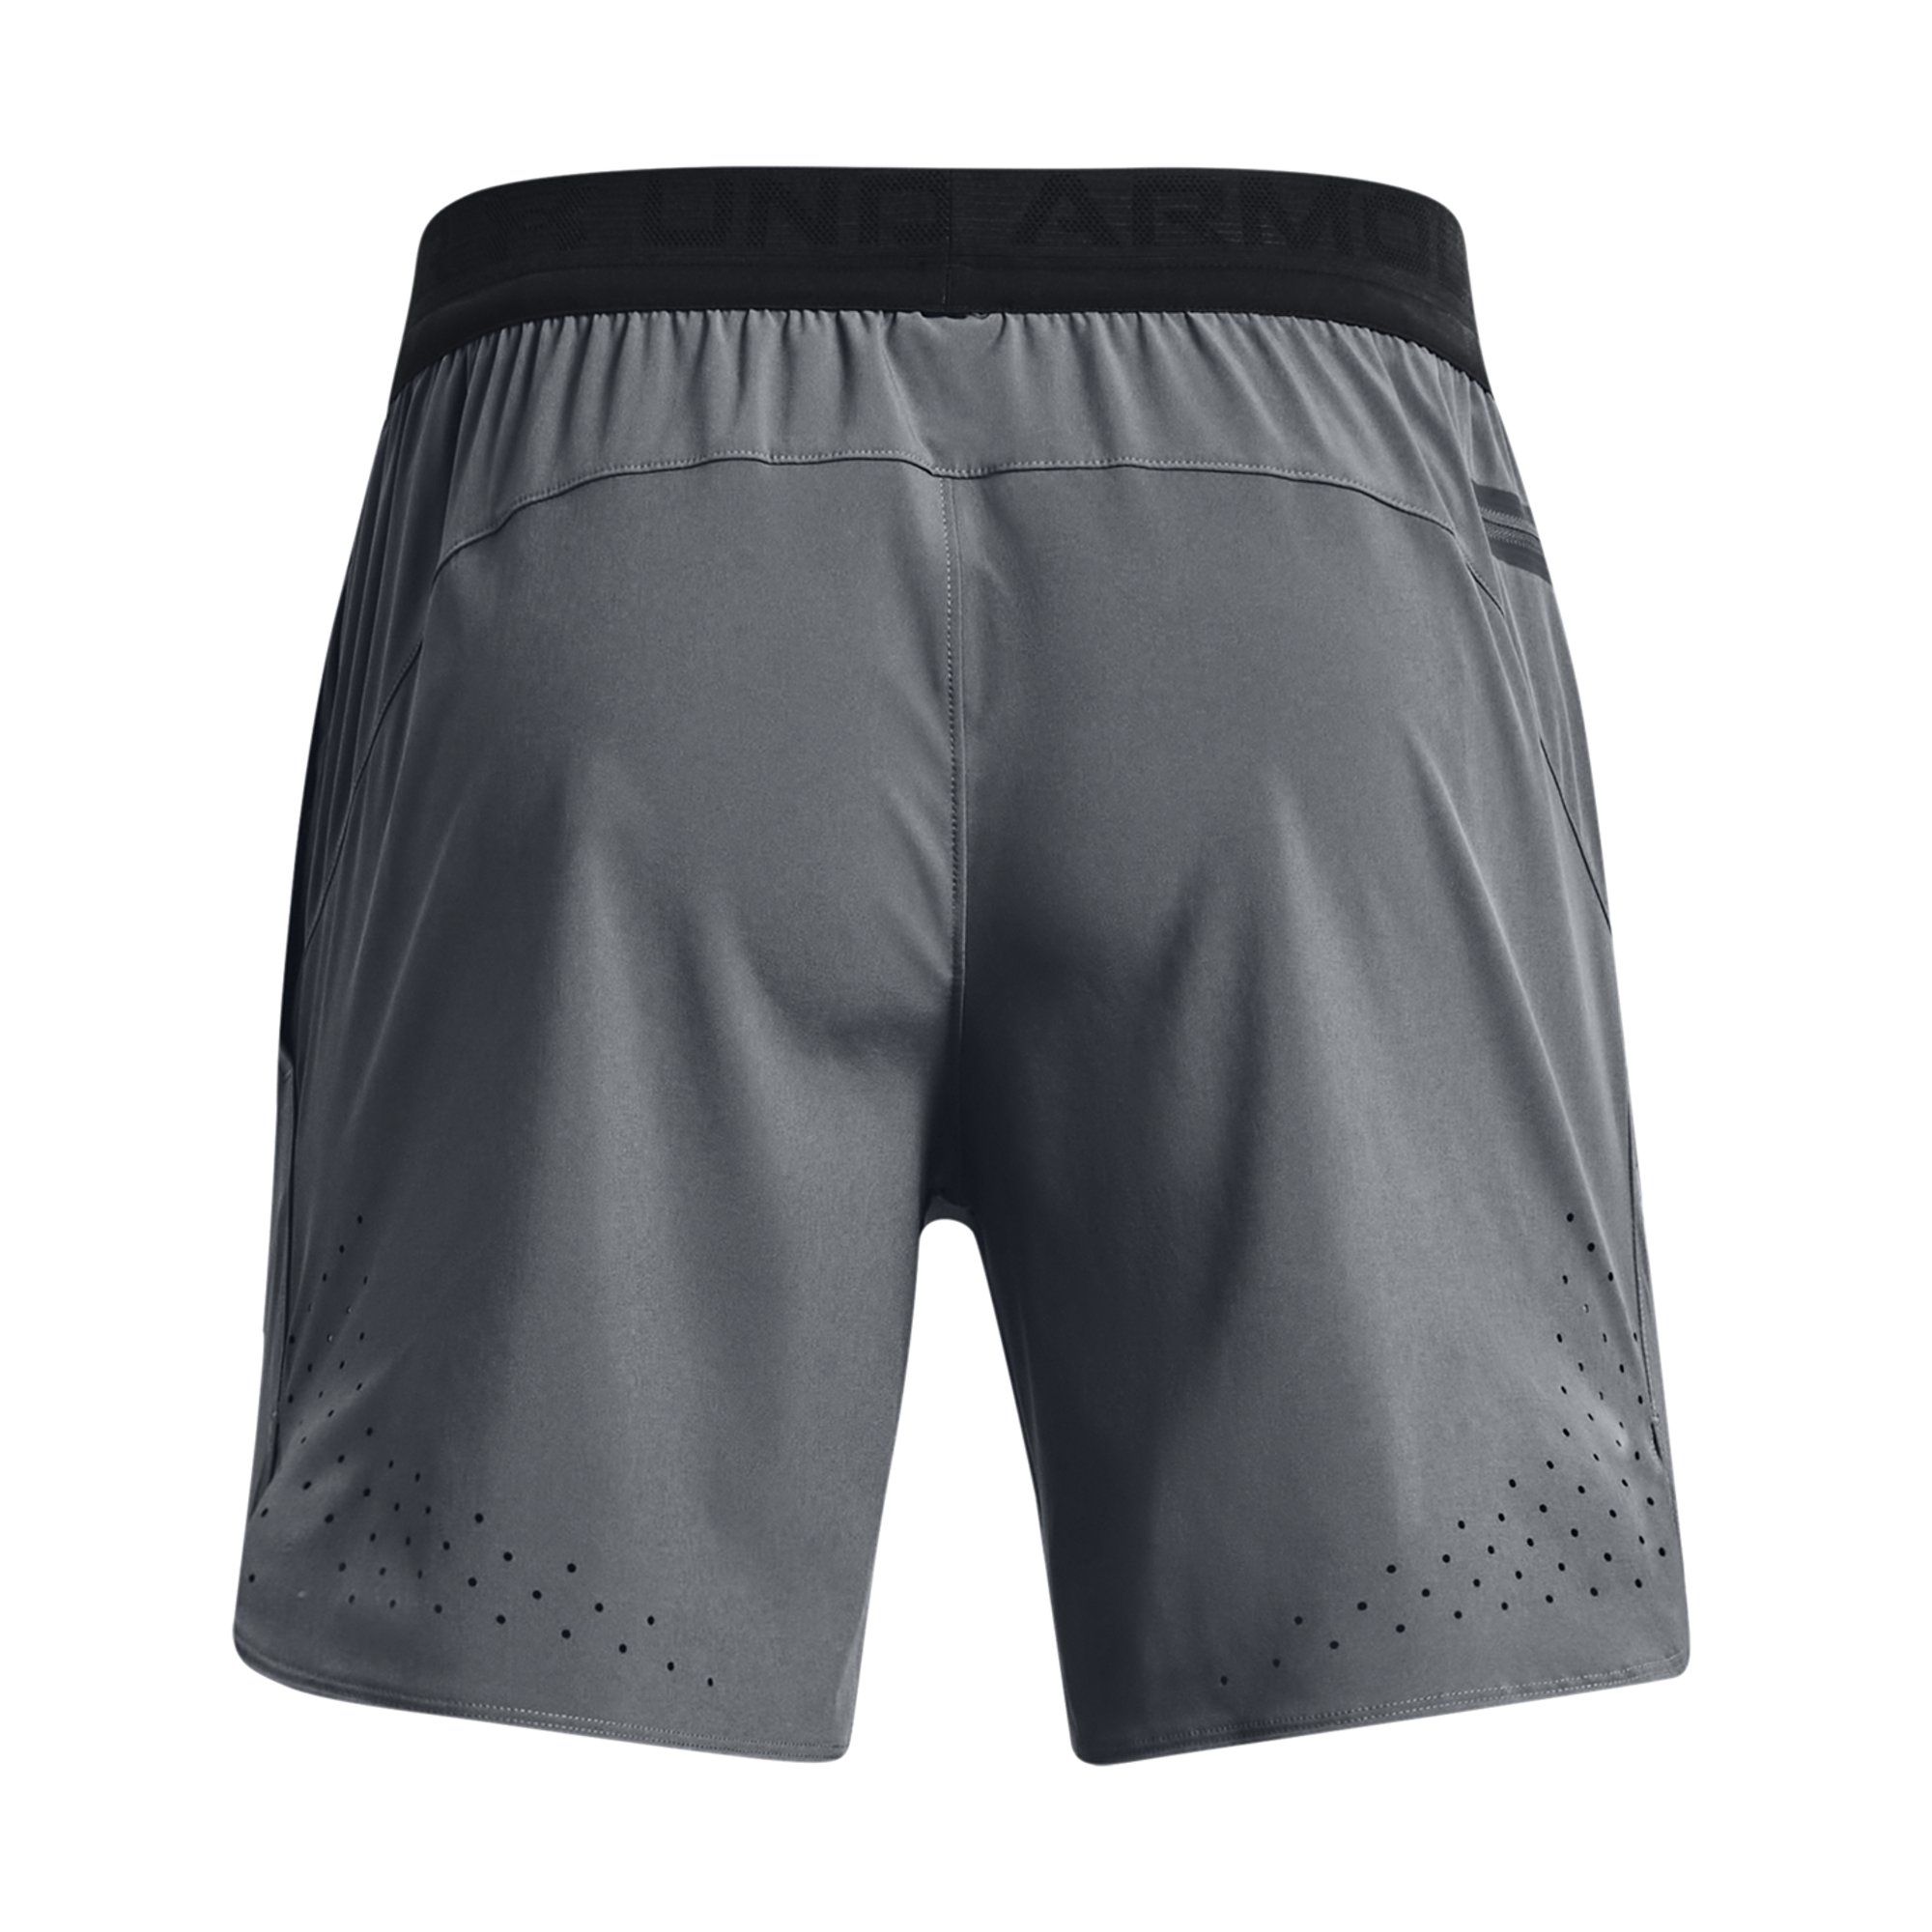  Under Armour Peak Woven Shorts - Pitch Gray 